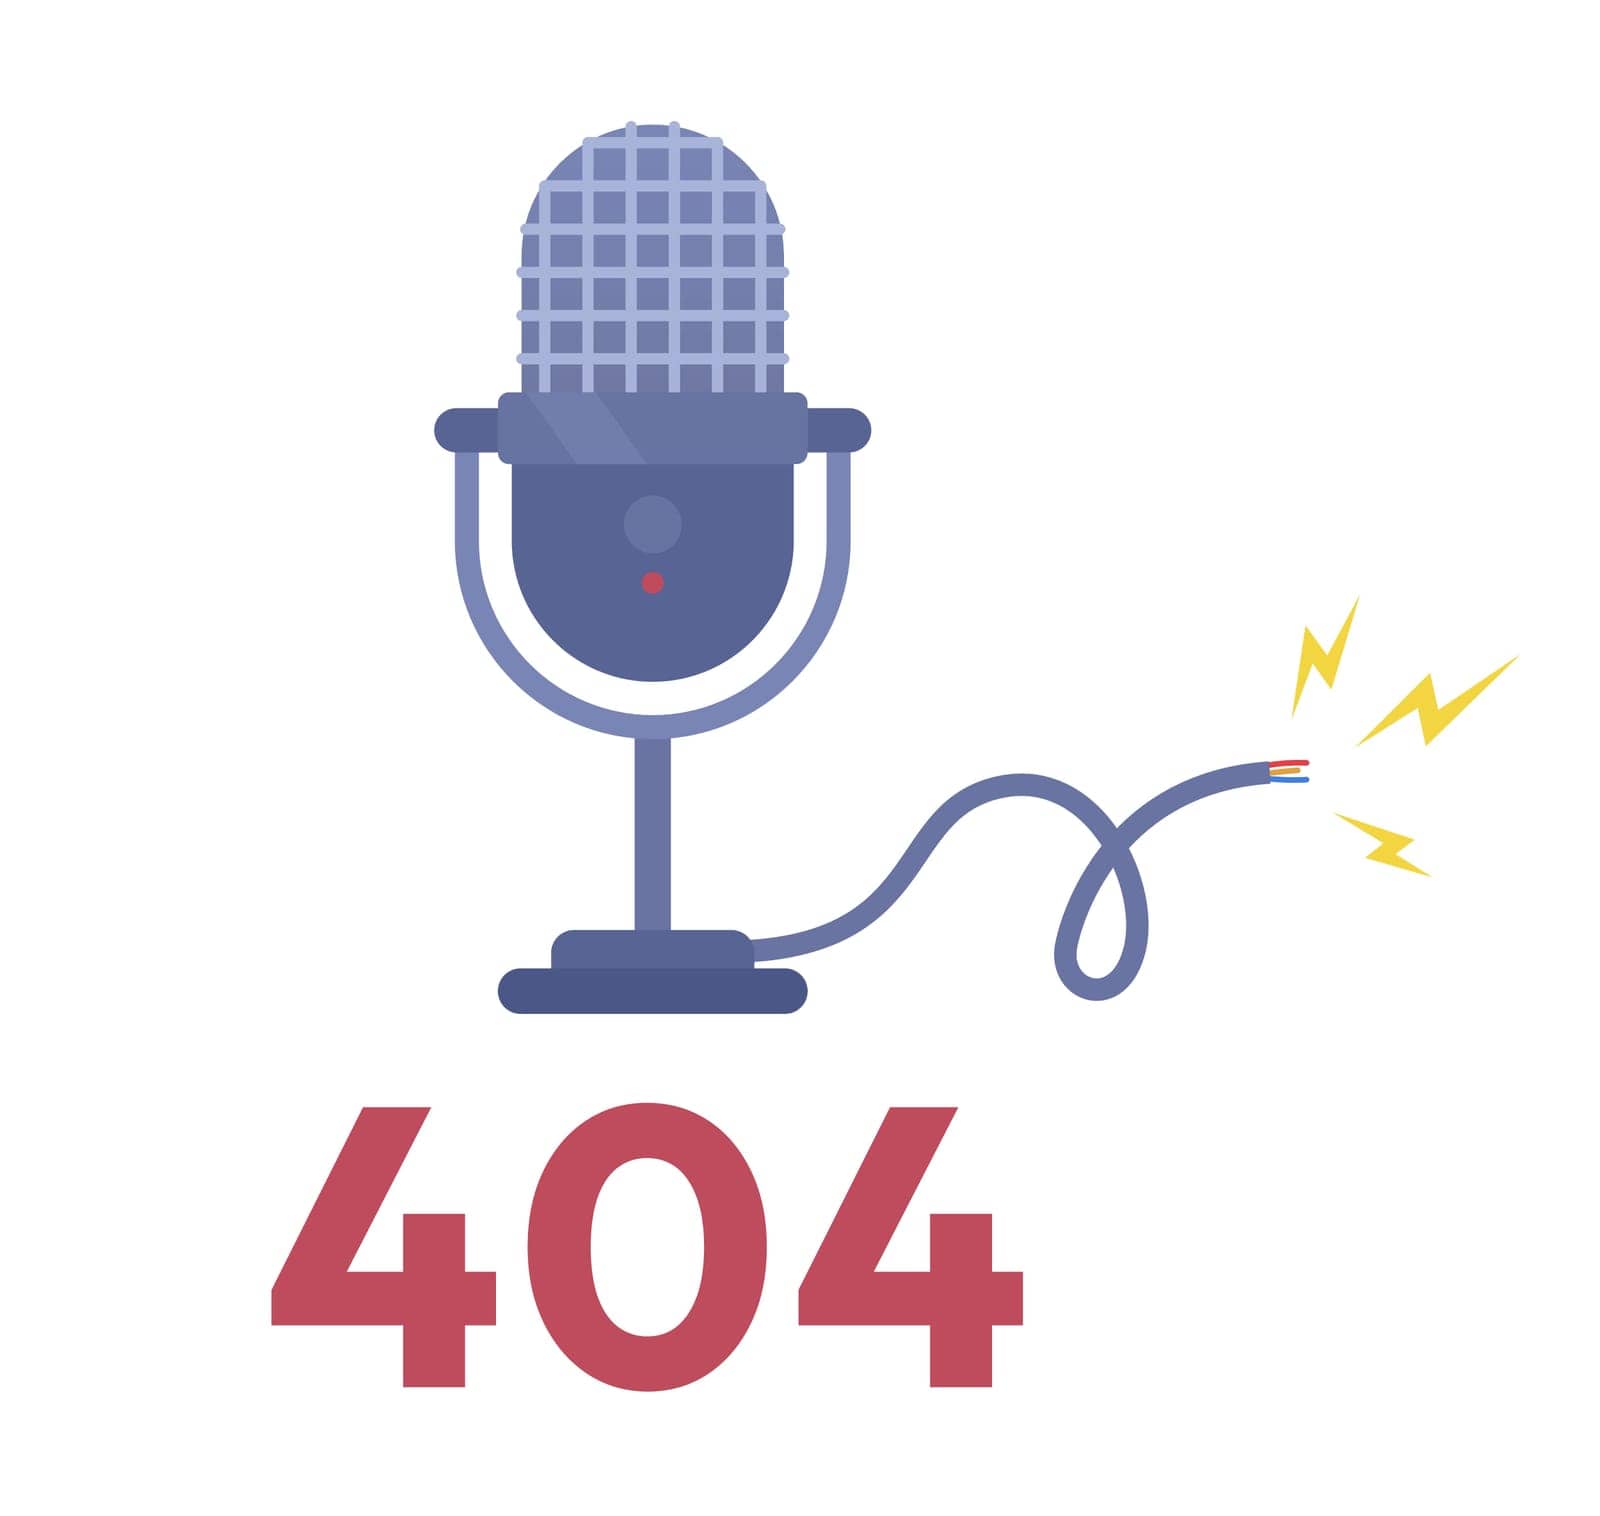 Microphone damage 404 page not found illustration. Mic with broken wire flat vector 2D cartoon object on white. Editable error flash message for application, web UX, UI design. Outfit Bold font used